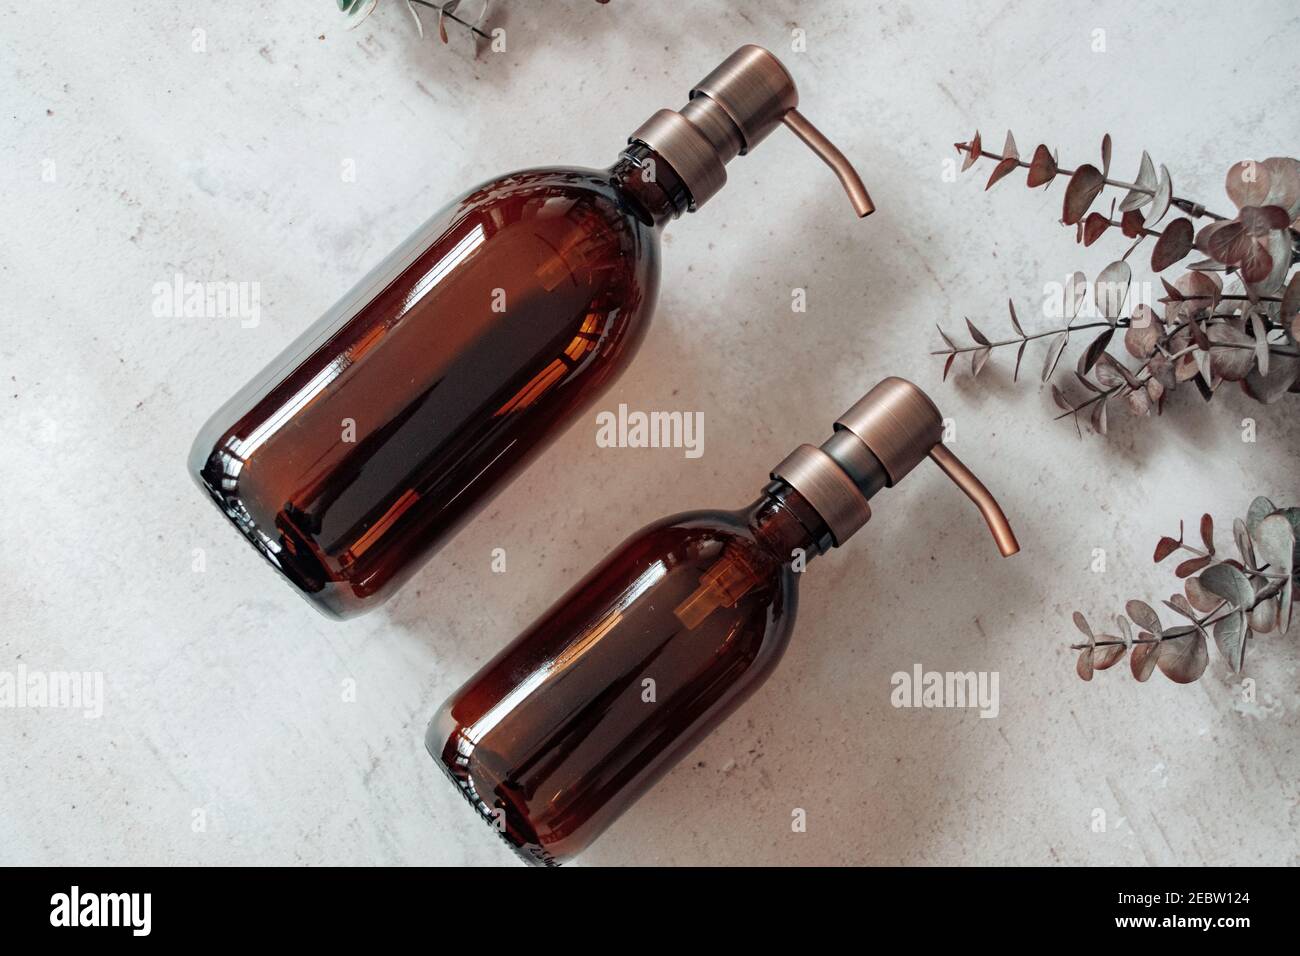 Amber glass shampoo or soap bottle dispenser with a copper steel pump against a stone background. Organic spa product with eucalyptus. Stock Photo